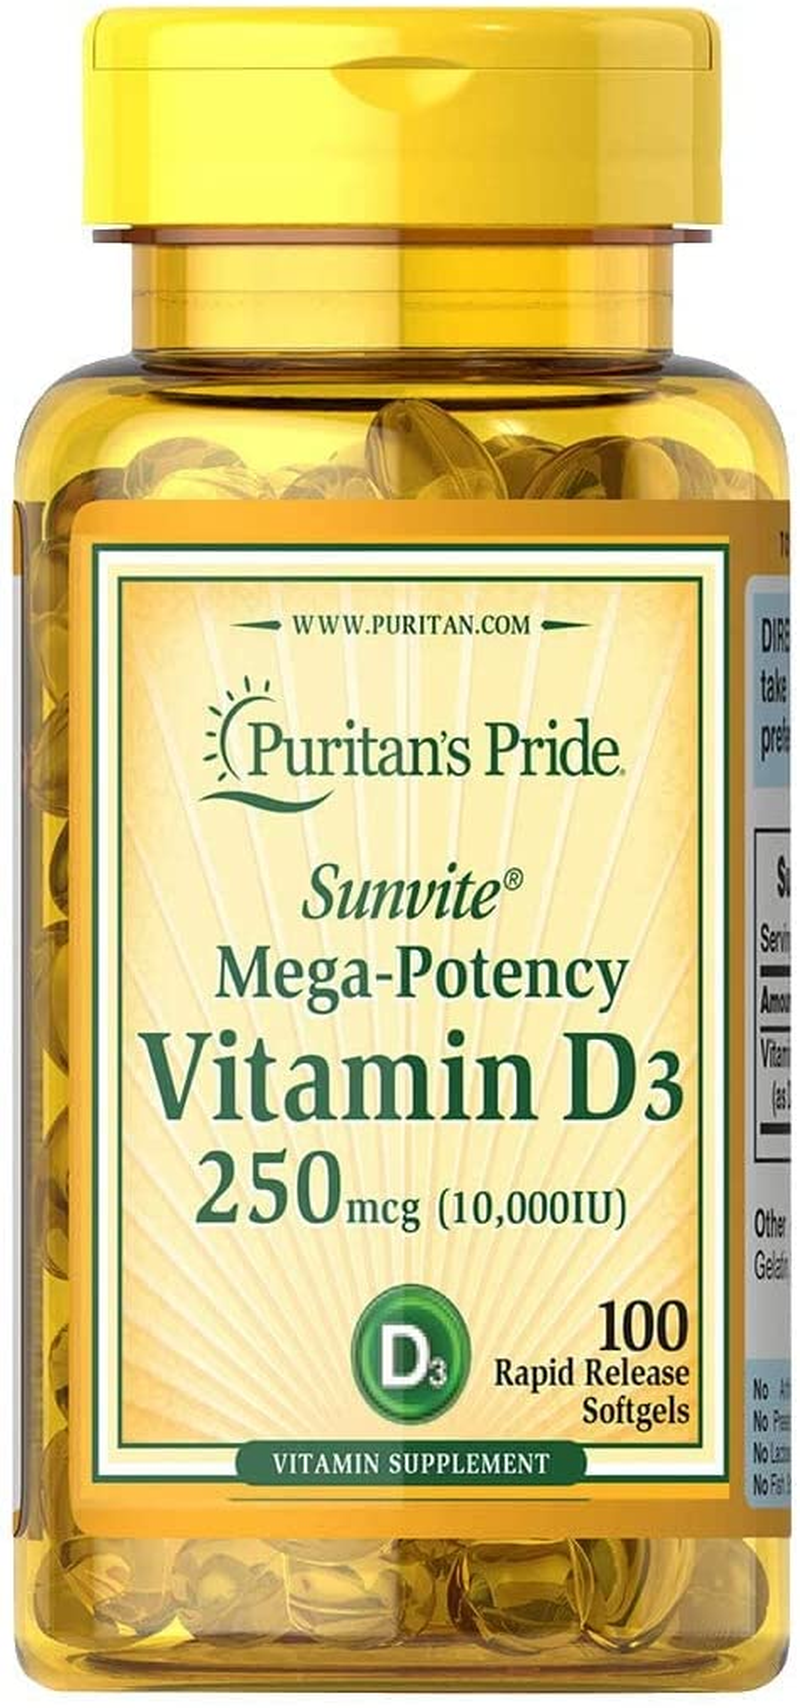 Puritans Pride Vitamin D3 10000 IU Bolsters Health Immune System Support and Healthy Bones & Teeth Softgels, Yellow, 100 Count